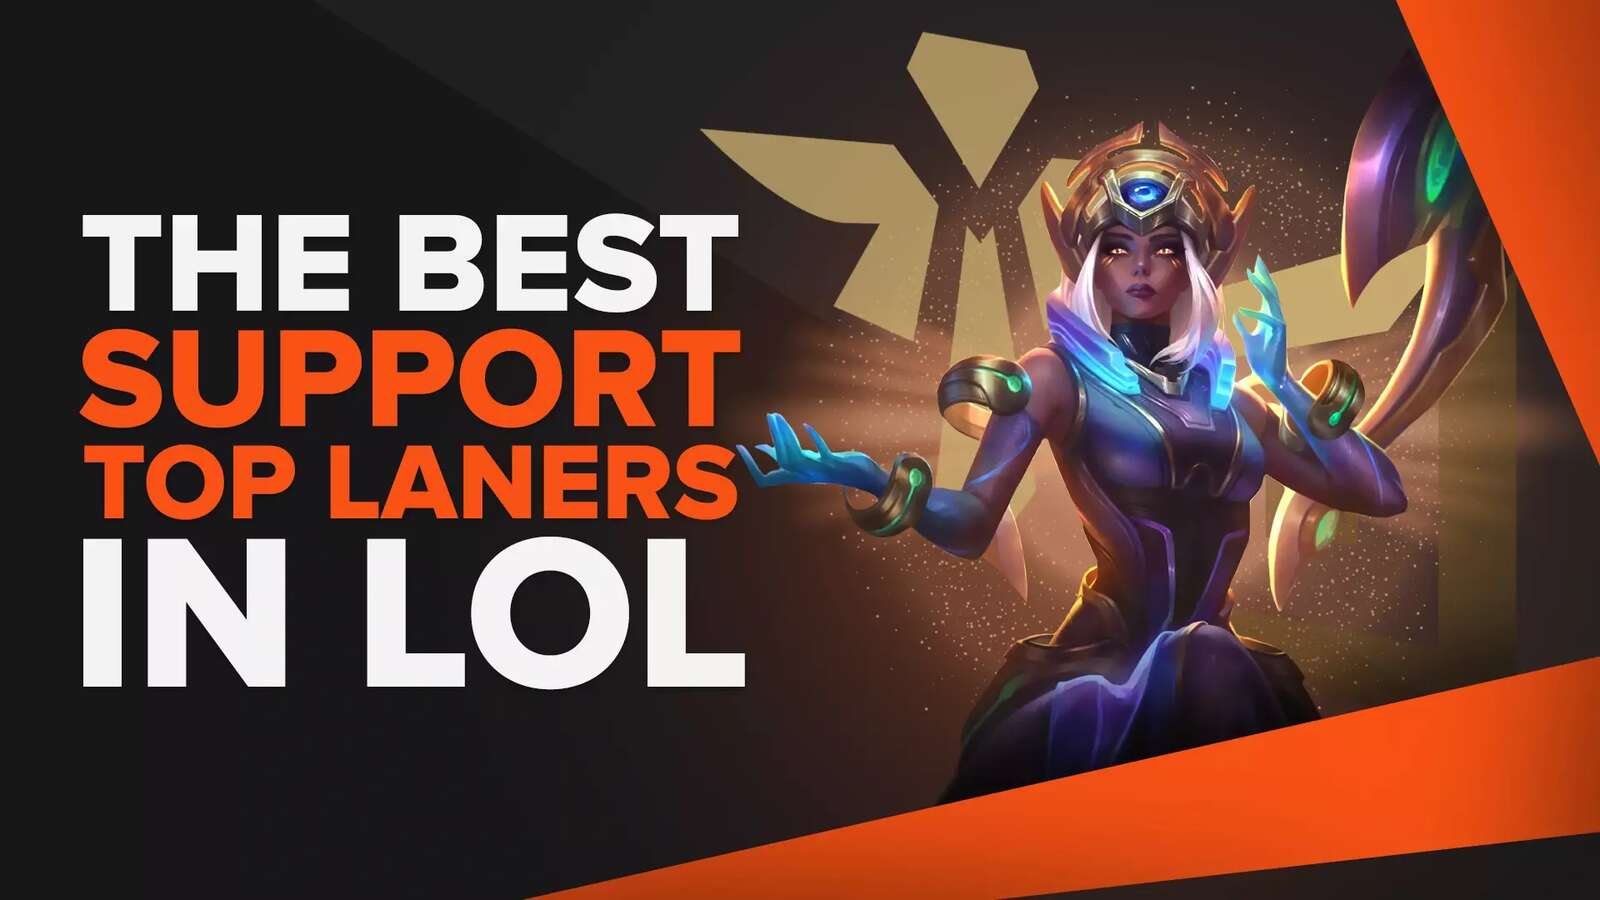 10 Best Support LoL Top Laners to Carry Teamfights